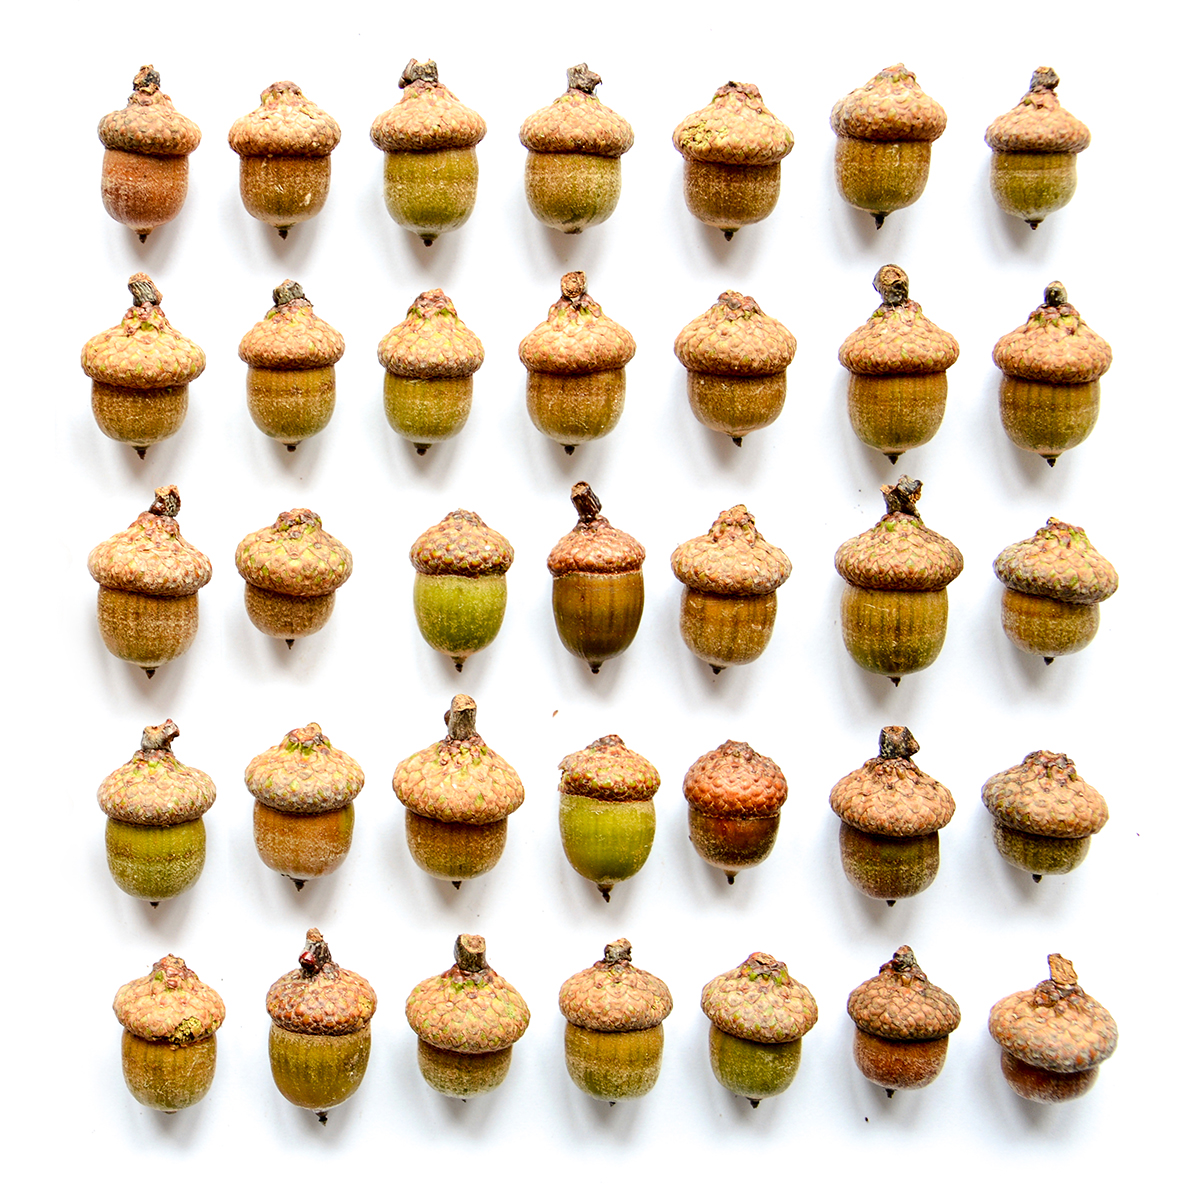 photo of 5 rows of acorns lined up on a white background